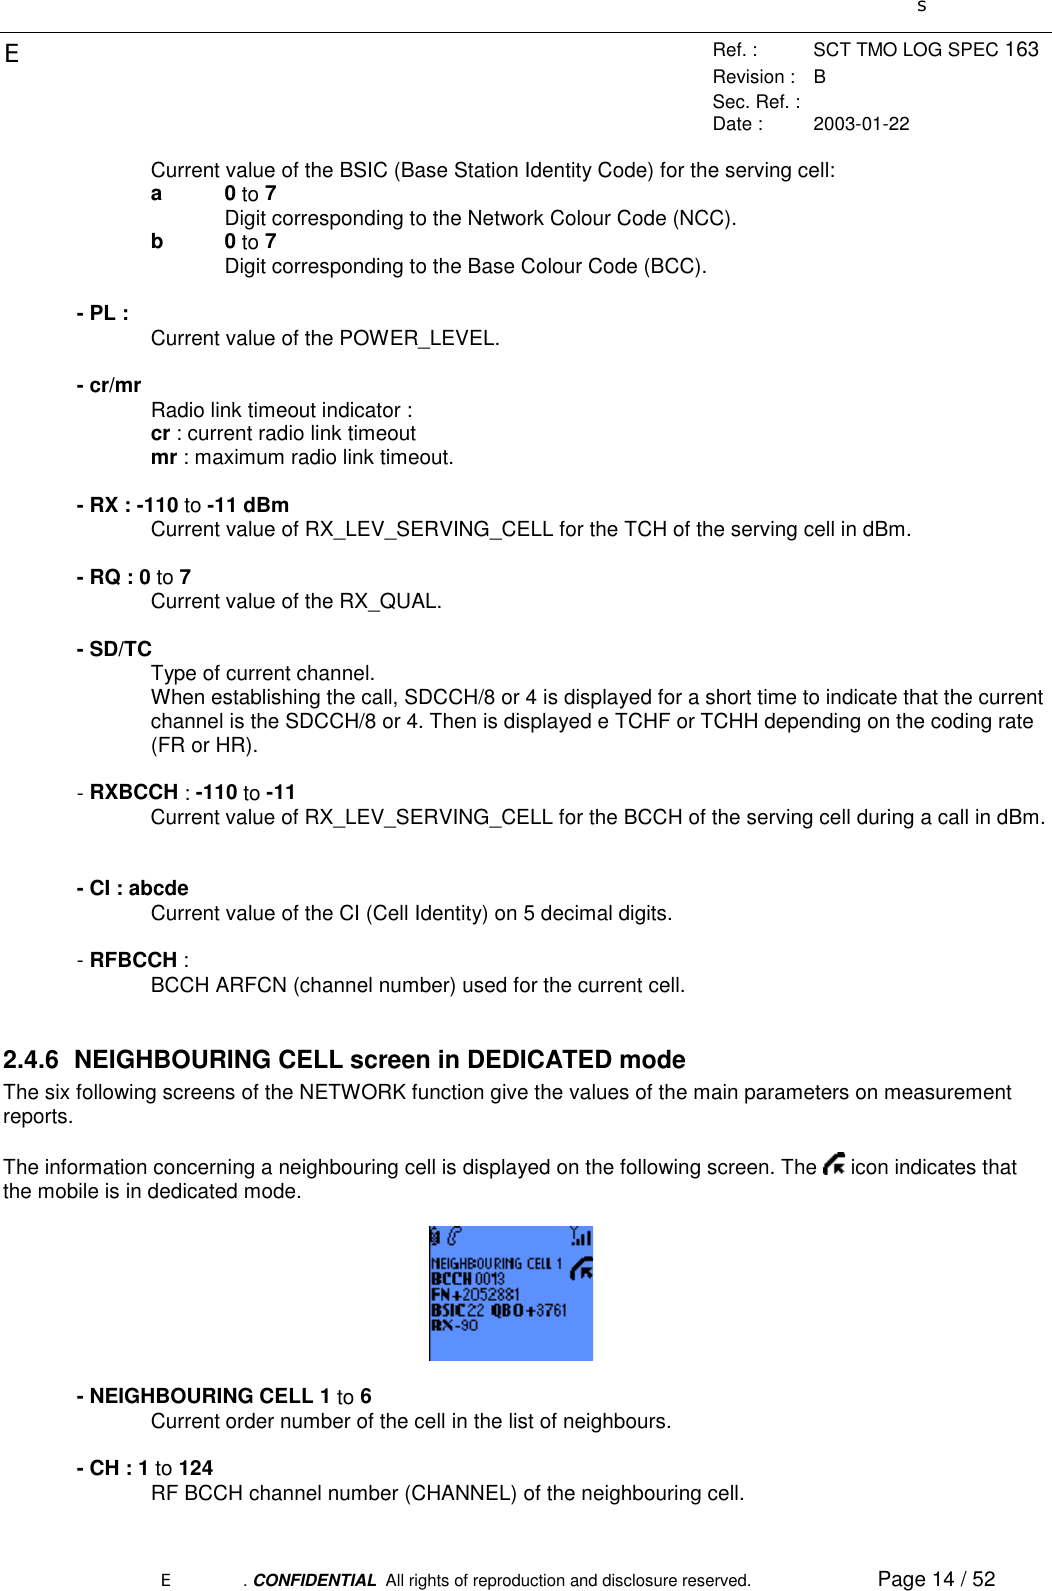 sERef. : SCT TMO LOG SPEC 163Revision : BSec. Ref. :Date : 2003-01-22E. CONFIDENTIAL  All rights of reproduction and disclosure reserved. Page 14 / 52Current value of the BSIC (Base Station Identity Code) for the serving cell:a0 to 7Digit corresponding to the Network Colour Code (NCC).b0 to 7Digit corresponding to the Base Colour Code (BCC).- PL : Current value of the POWER_LEVEL.- cr/mr Radio link timeout indicator :cr : current radio link timeoutmr : maximum radio link timeout.- RX : -110 to -11 dBmCurrent value of RX_LEV_SERVING_CELL for the TCH of the serving cell in dBm.- RQ : 0 to 7Current value of the RX_QUAL.- SD/TCType of current channel.When establishing the call, SDCCH/8 or 4 is displayed for a short time to indicate that the currentchannel is the SDCCH/8 or 4. Then is displayed e TCHF or TCHH depending on the coding rate(FR or HR).- RXBCCH : -110 to -11Current value of RX_LEV_SERVING_CELL for the BCCH of the serving cell during a call in dBm.- CI : abcdeCurrent value of the CI (Cell Identity) on 5 decimal digits.- RFBCCH :BCCH ARFCN (channel number) used for the current cell.2.4.6  NEIGHBOURING CELL screen in DEDICATED modeThe six following screens of the NETWORK function give the values of the main parameters on measurementreports.The information concerning a neighbouring cell is displayed on the following screen. The   icon indicates thatthe mobile is in dedicated mode.- NEIGHBOURING CELL 1 to 6Current order number of the cell in the list of neighbours.- CH : 1 to 124RF BCCH channel number (CHANNEL) of the neighbouring cell.